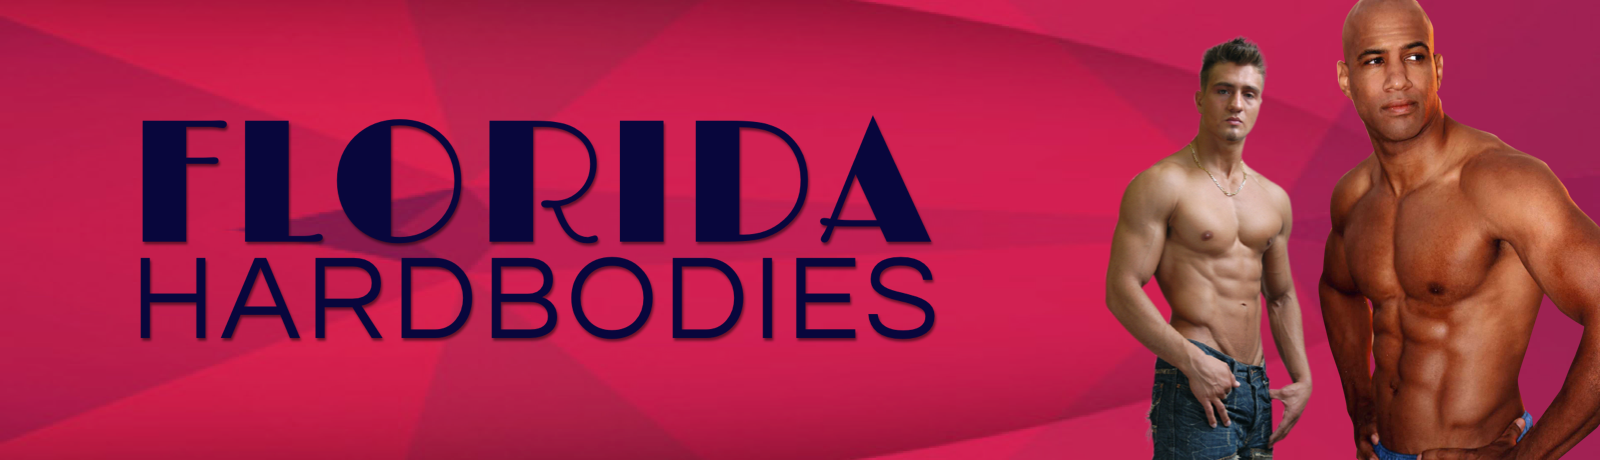 Ocala Male Adult Entertainers